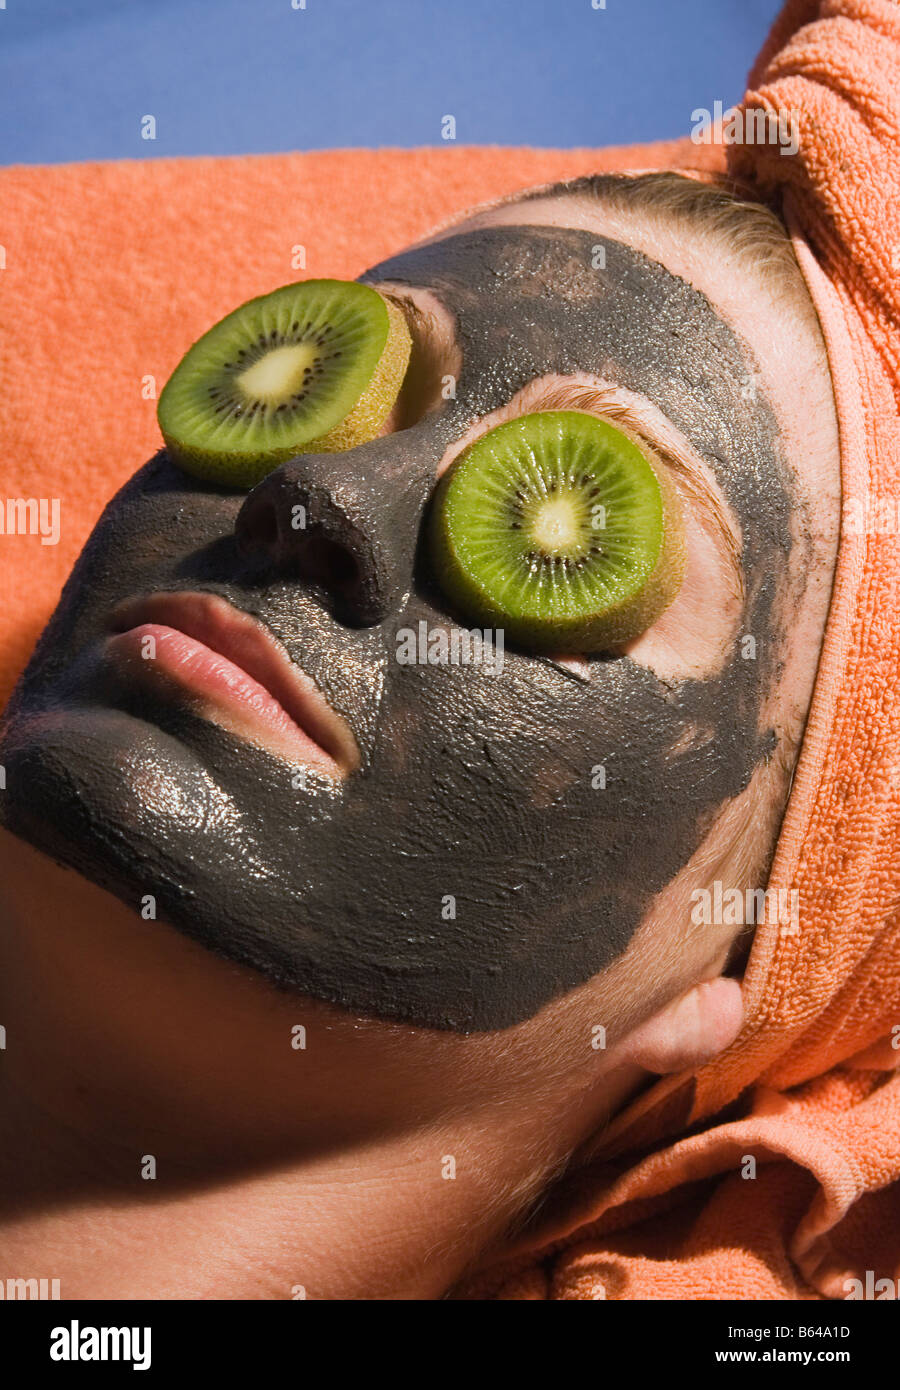 Young woman with exfoliating face mask and slices of kiwi fruit on her eyes Stock Photo